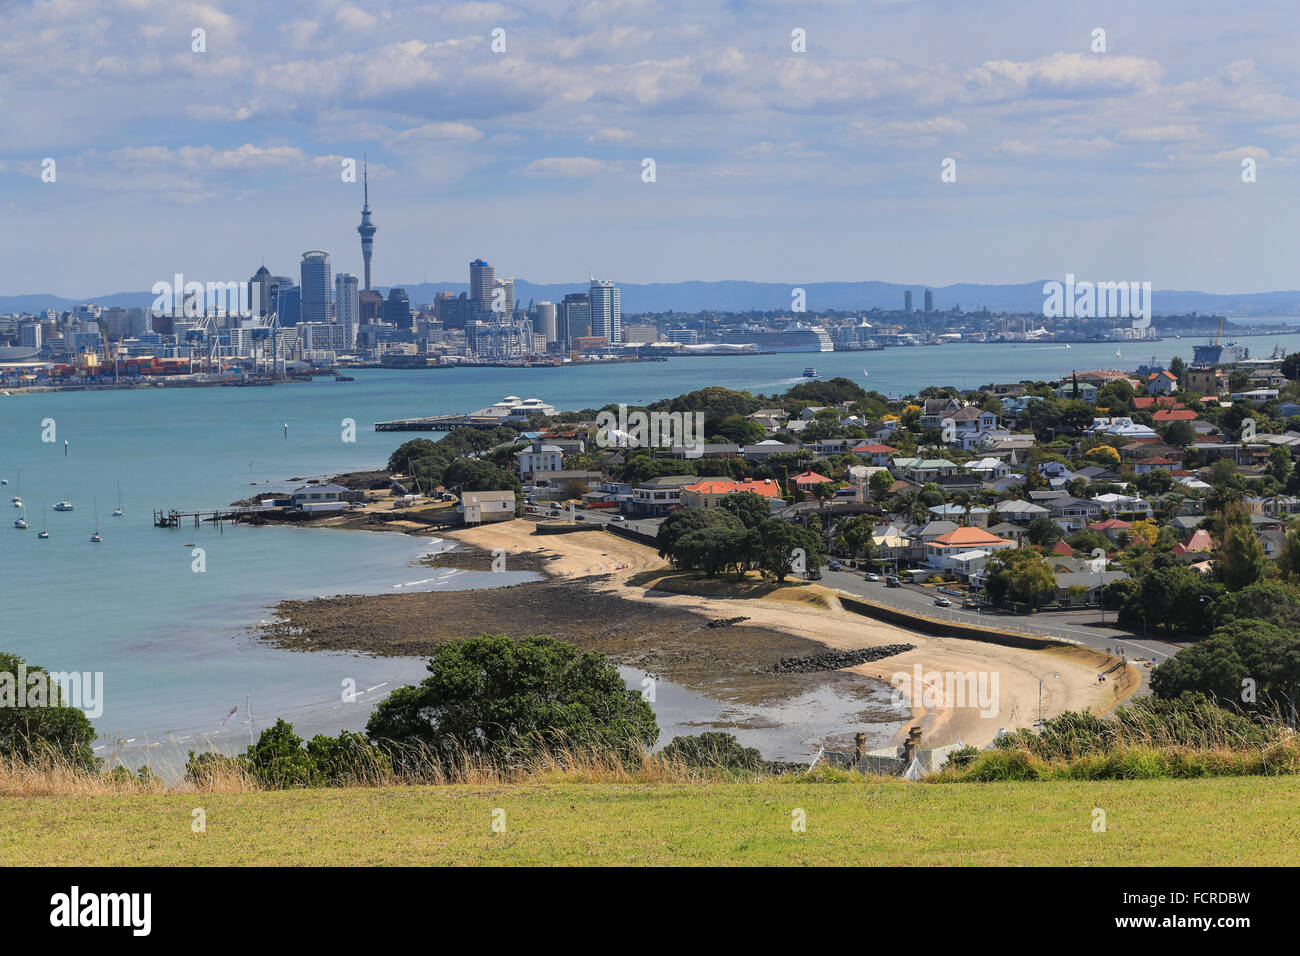 View of Torpedo Bay at Devonport and the Auckland city skyline from Hauraki Gulf Maritime Park, Auckland, New Zealand. Stock Photo